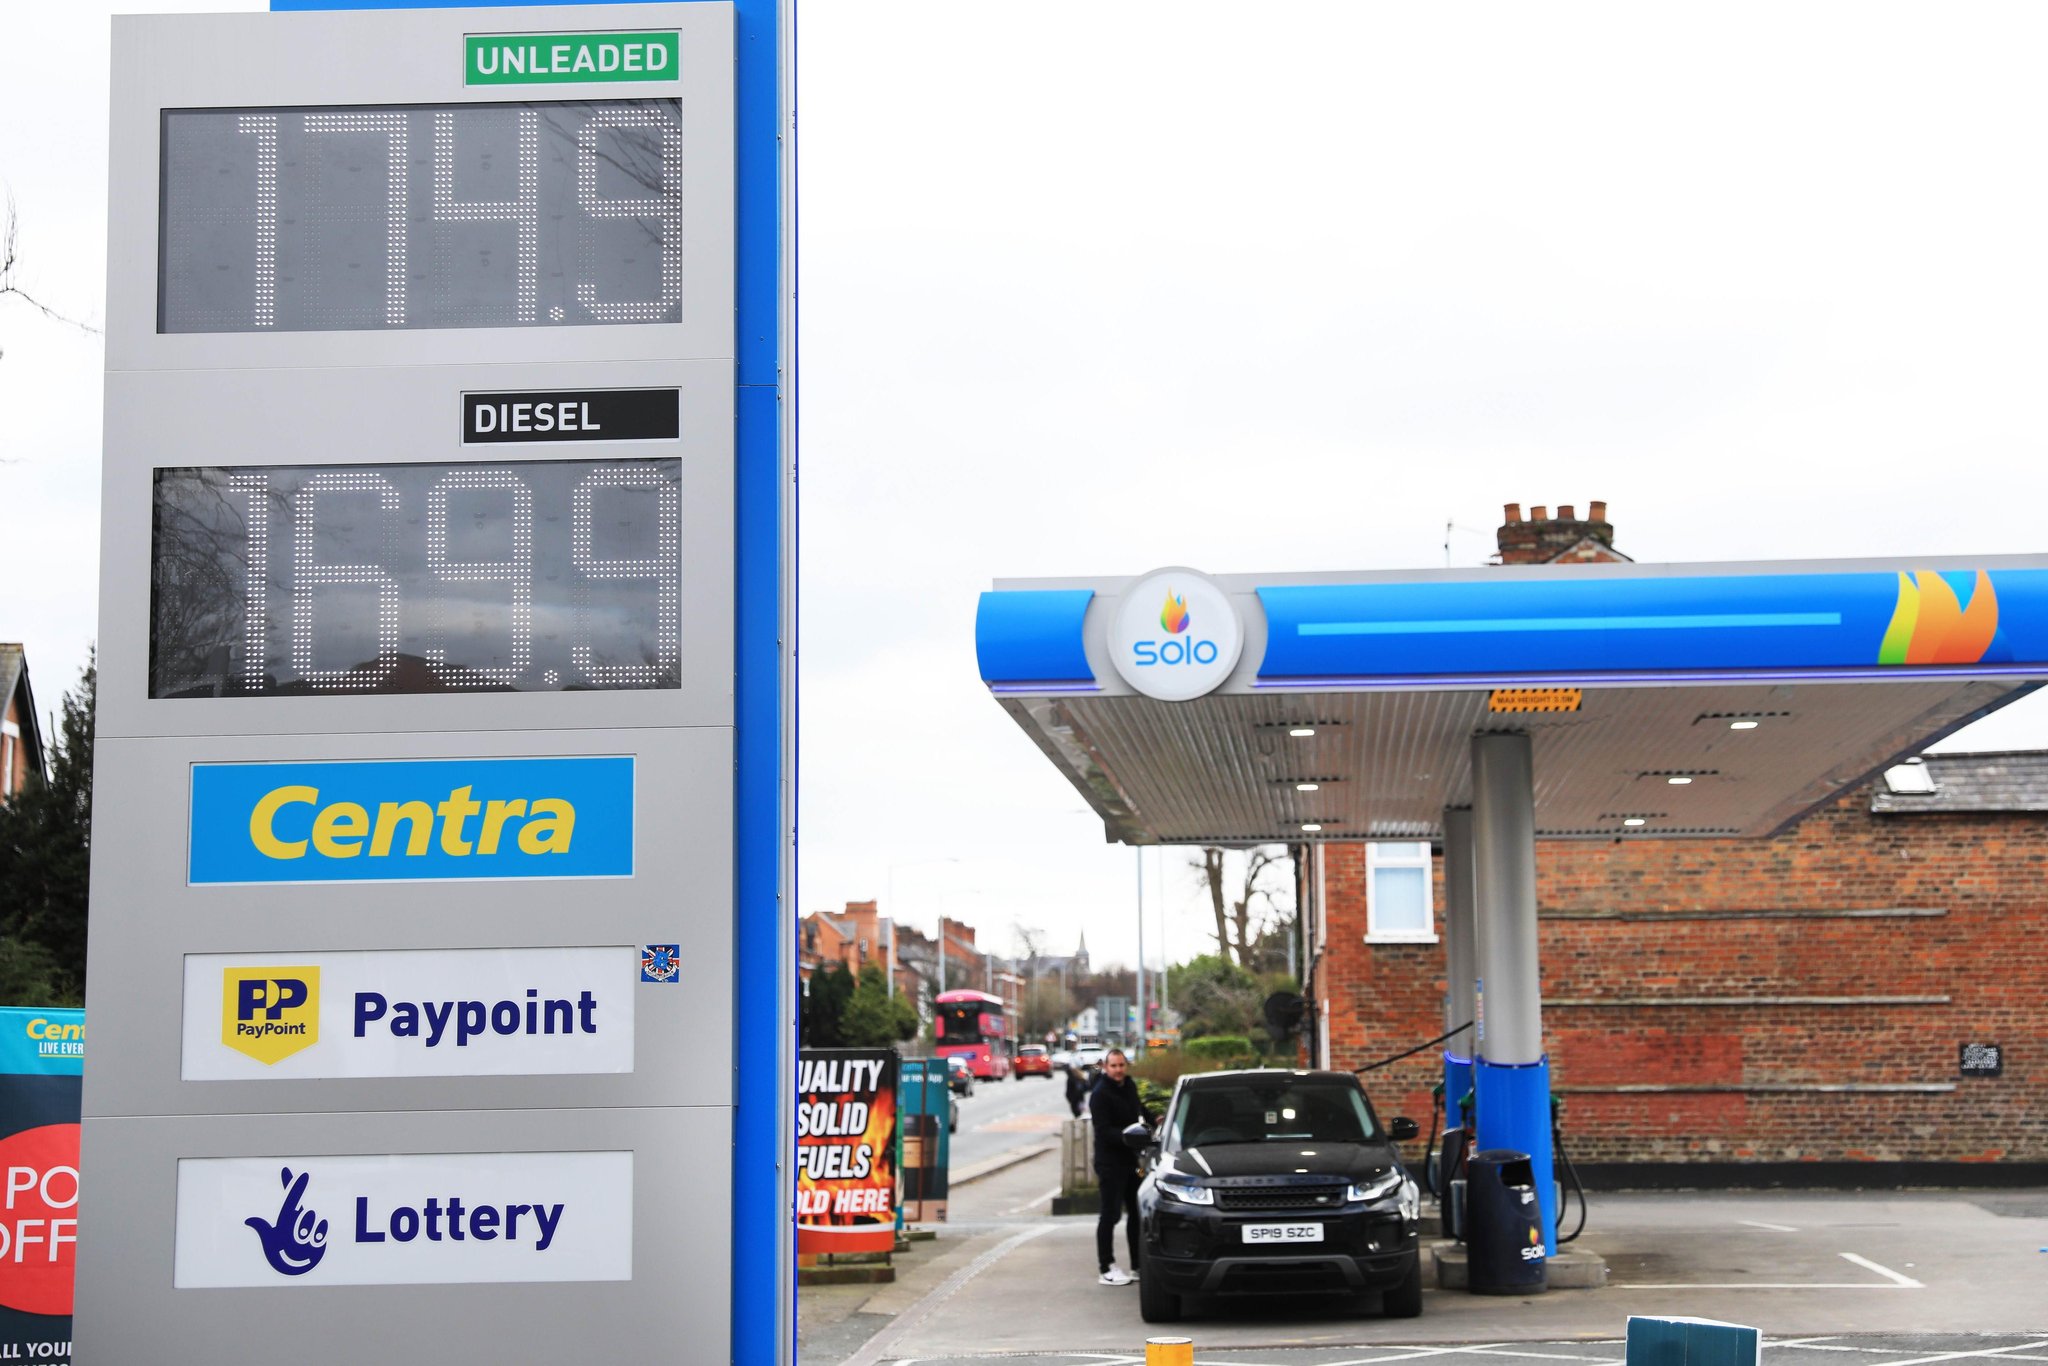 Average fuel prices creeping up again after slight fall since March